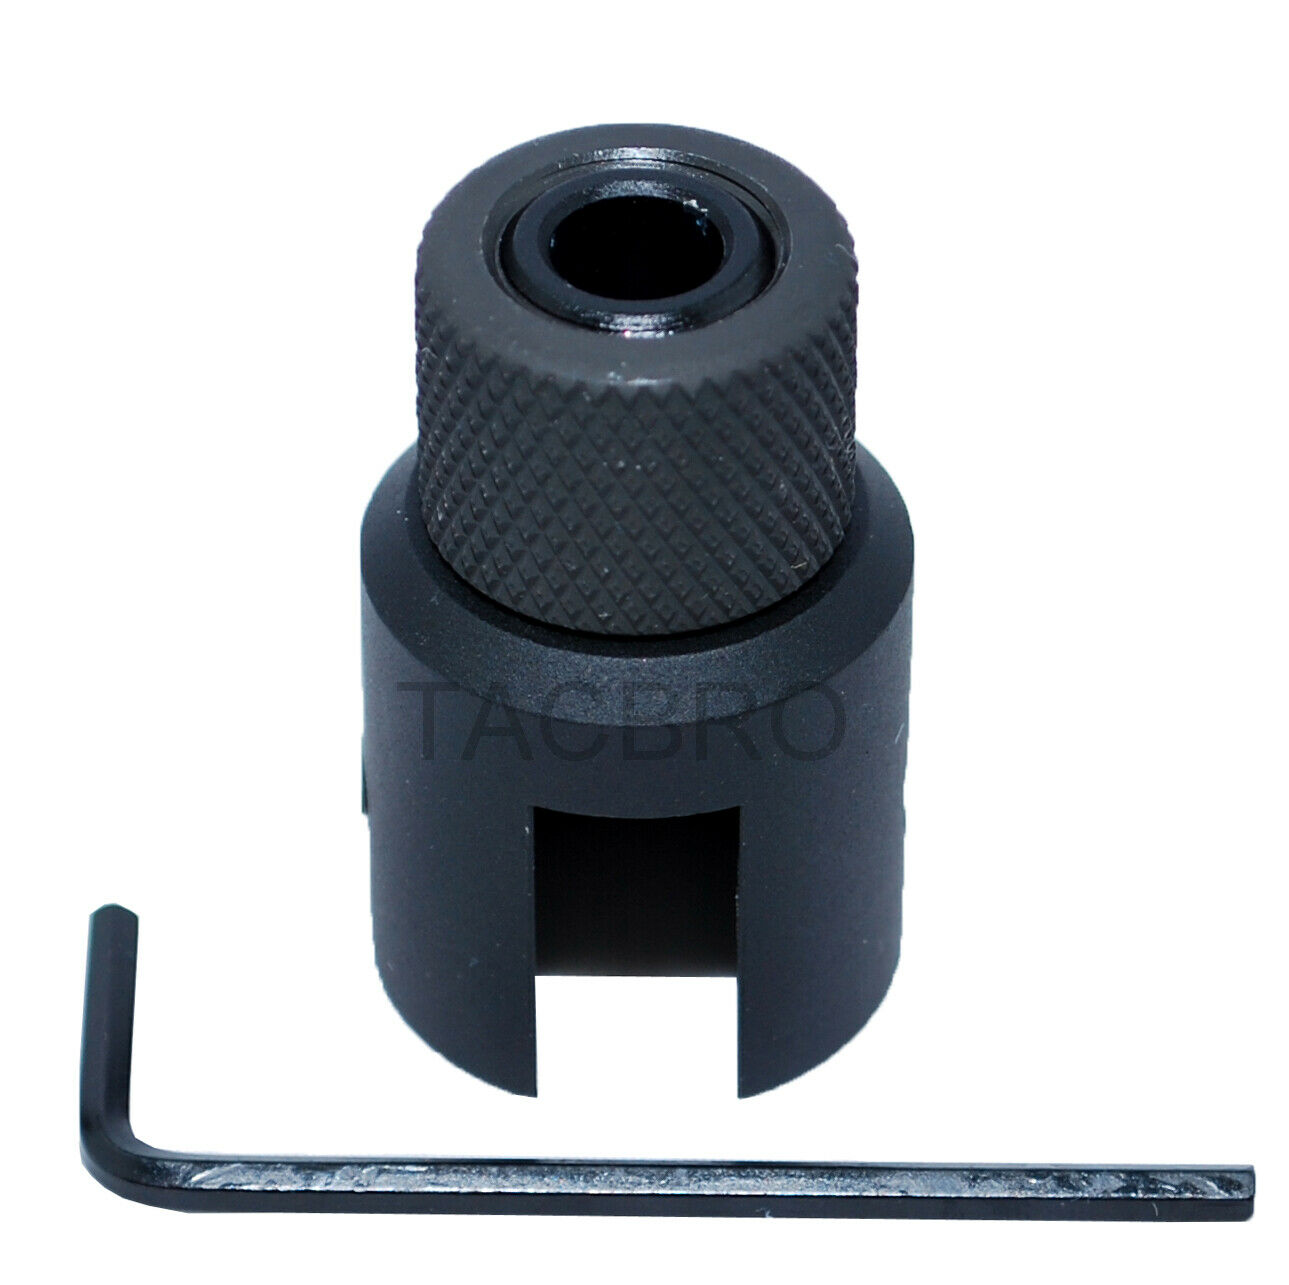 Ruger 10-22 1022 Muzzle Brake Adapter + .750 Thread Protector 1/2x28 TPI